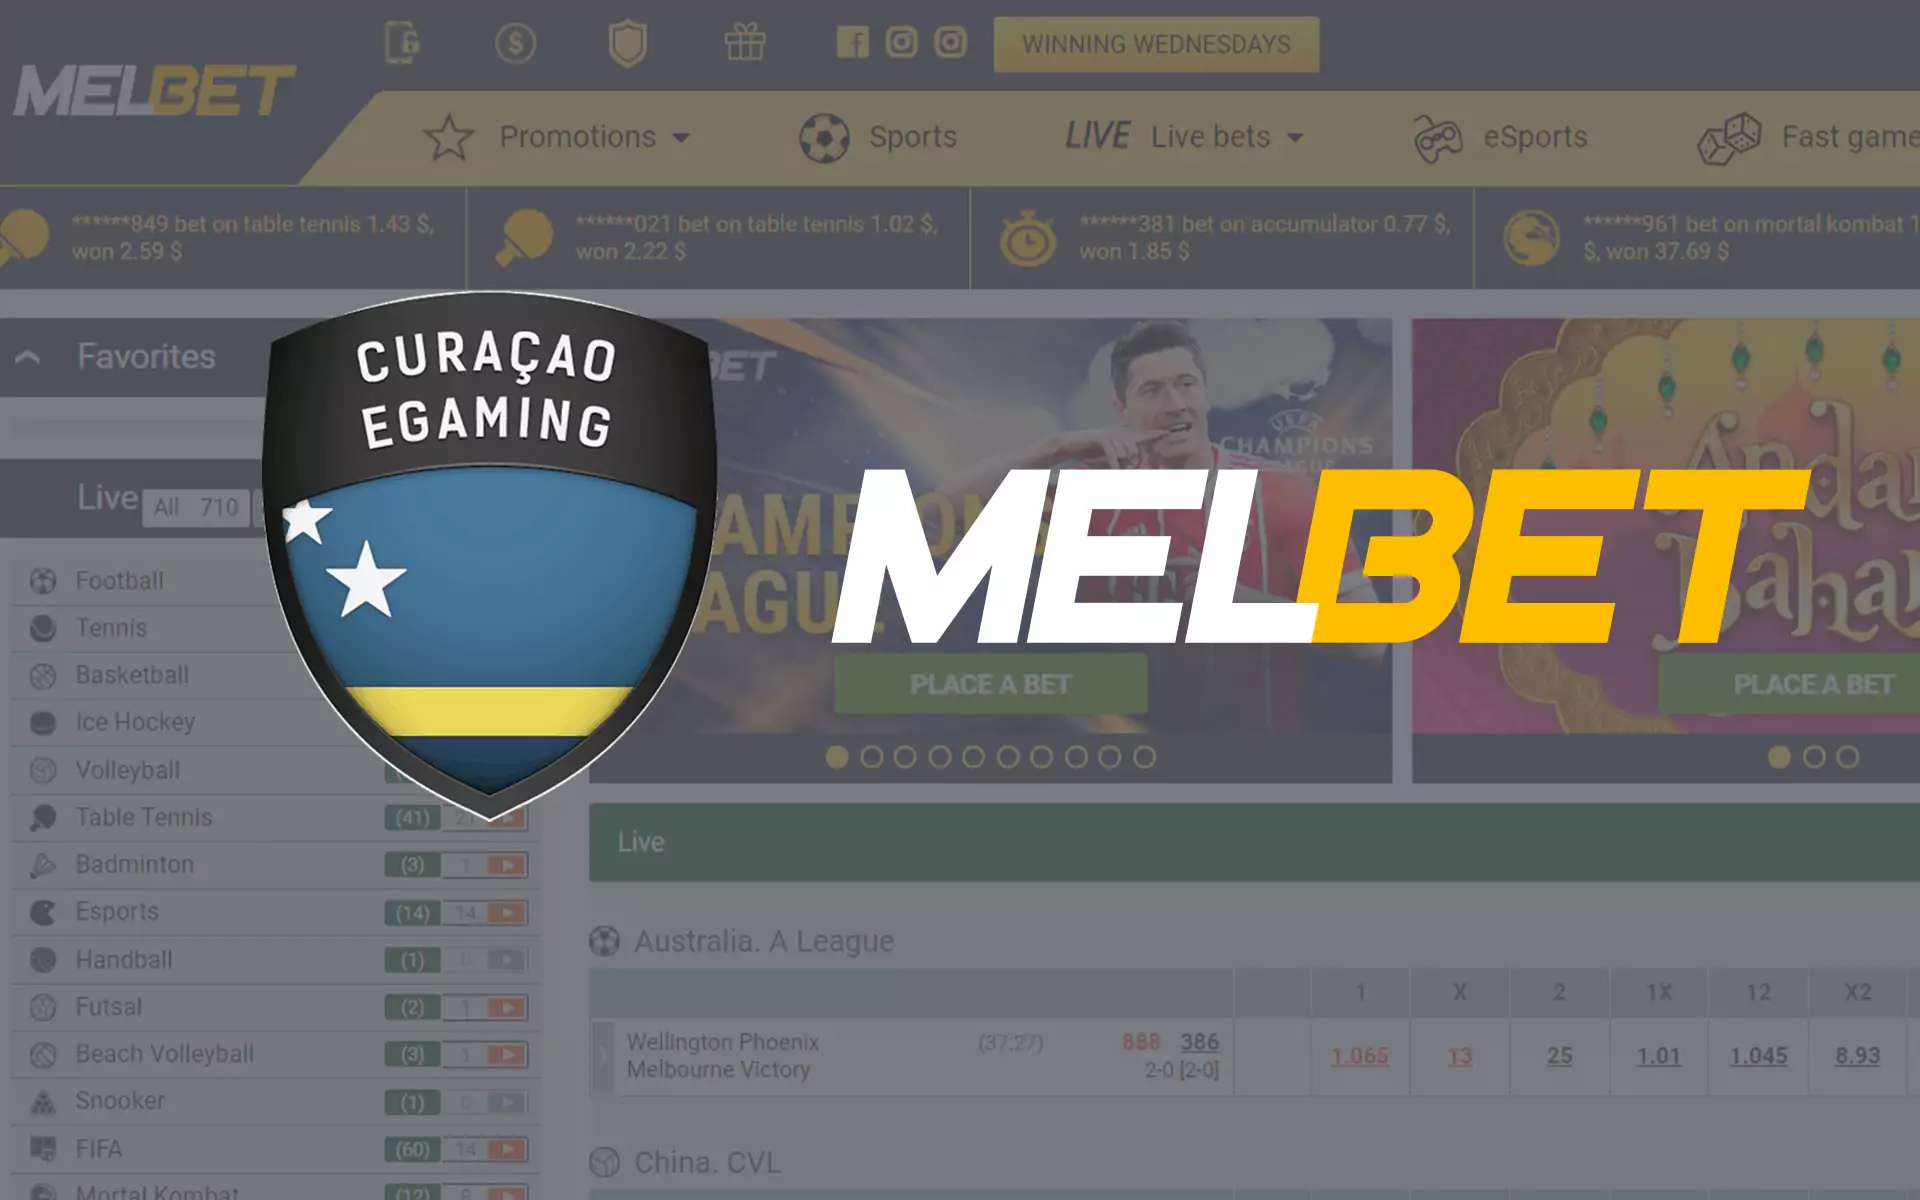 Melbet India is a licensed bookmaker and casino.